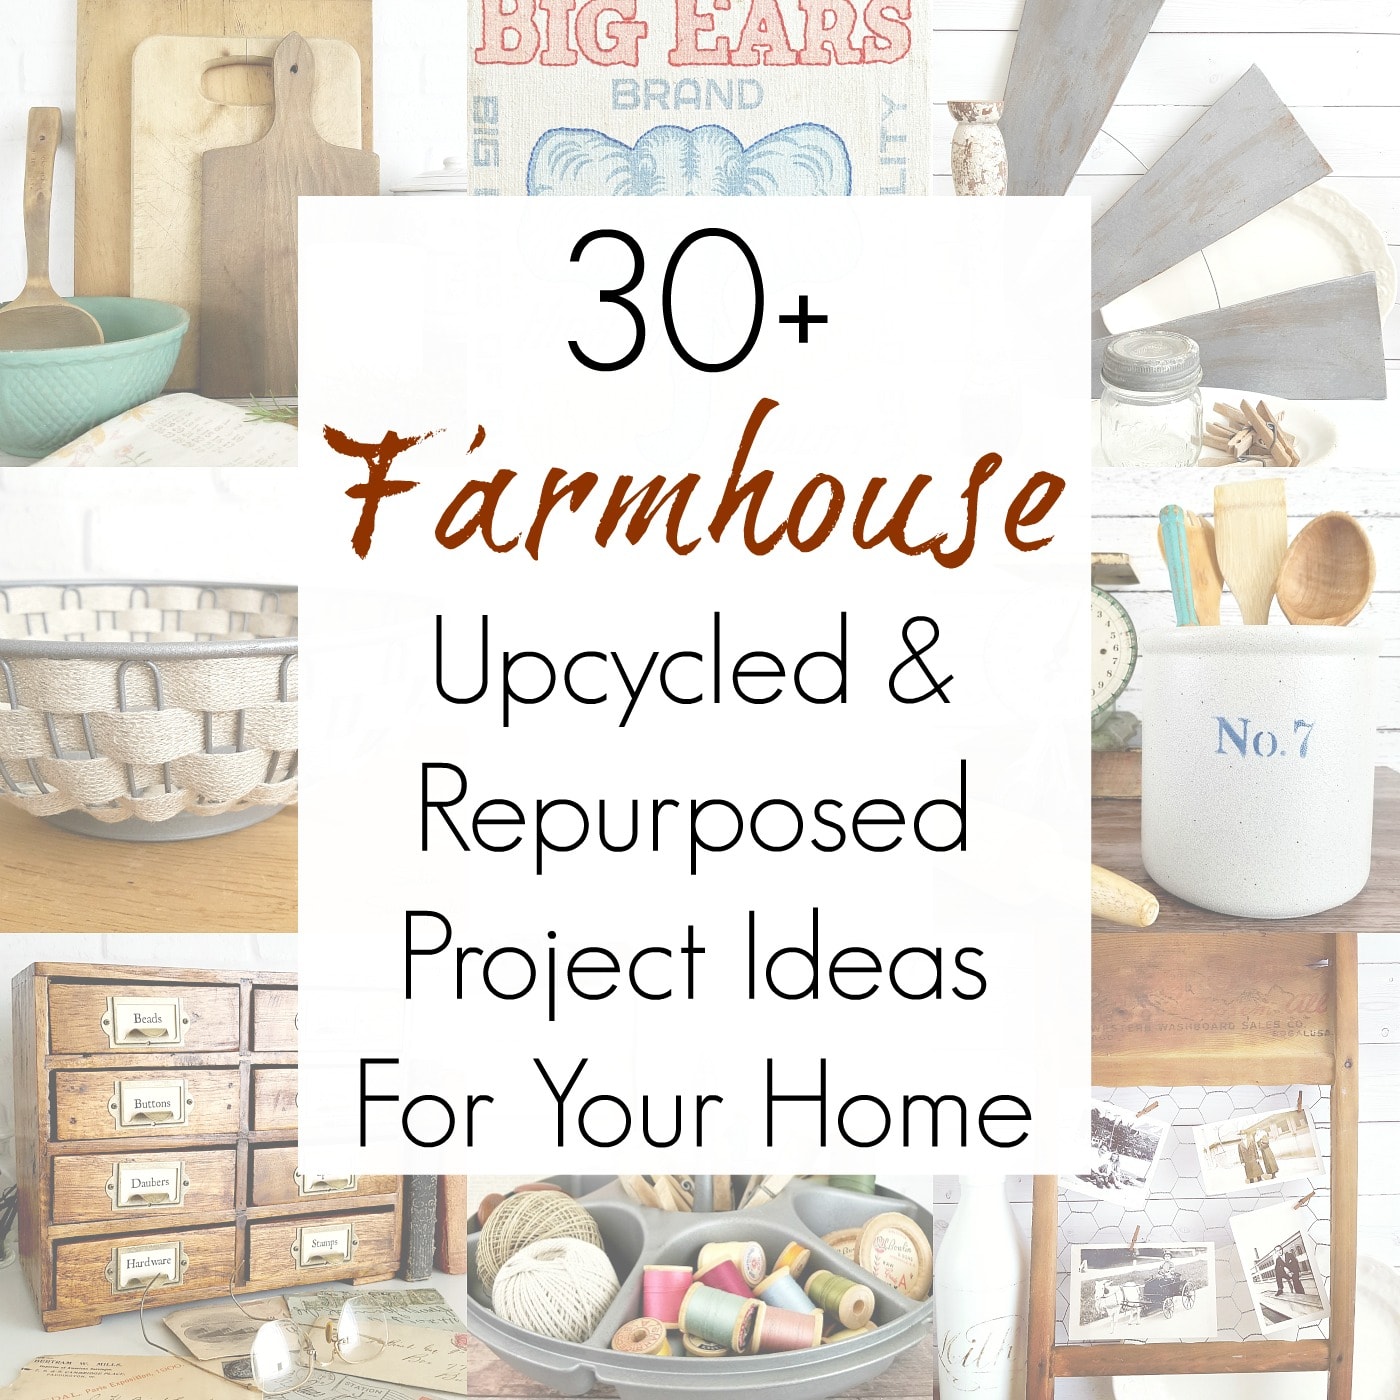 Thrifting for farmhouse decor with upcycle craft ideas